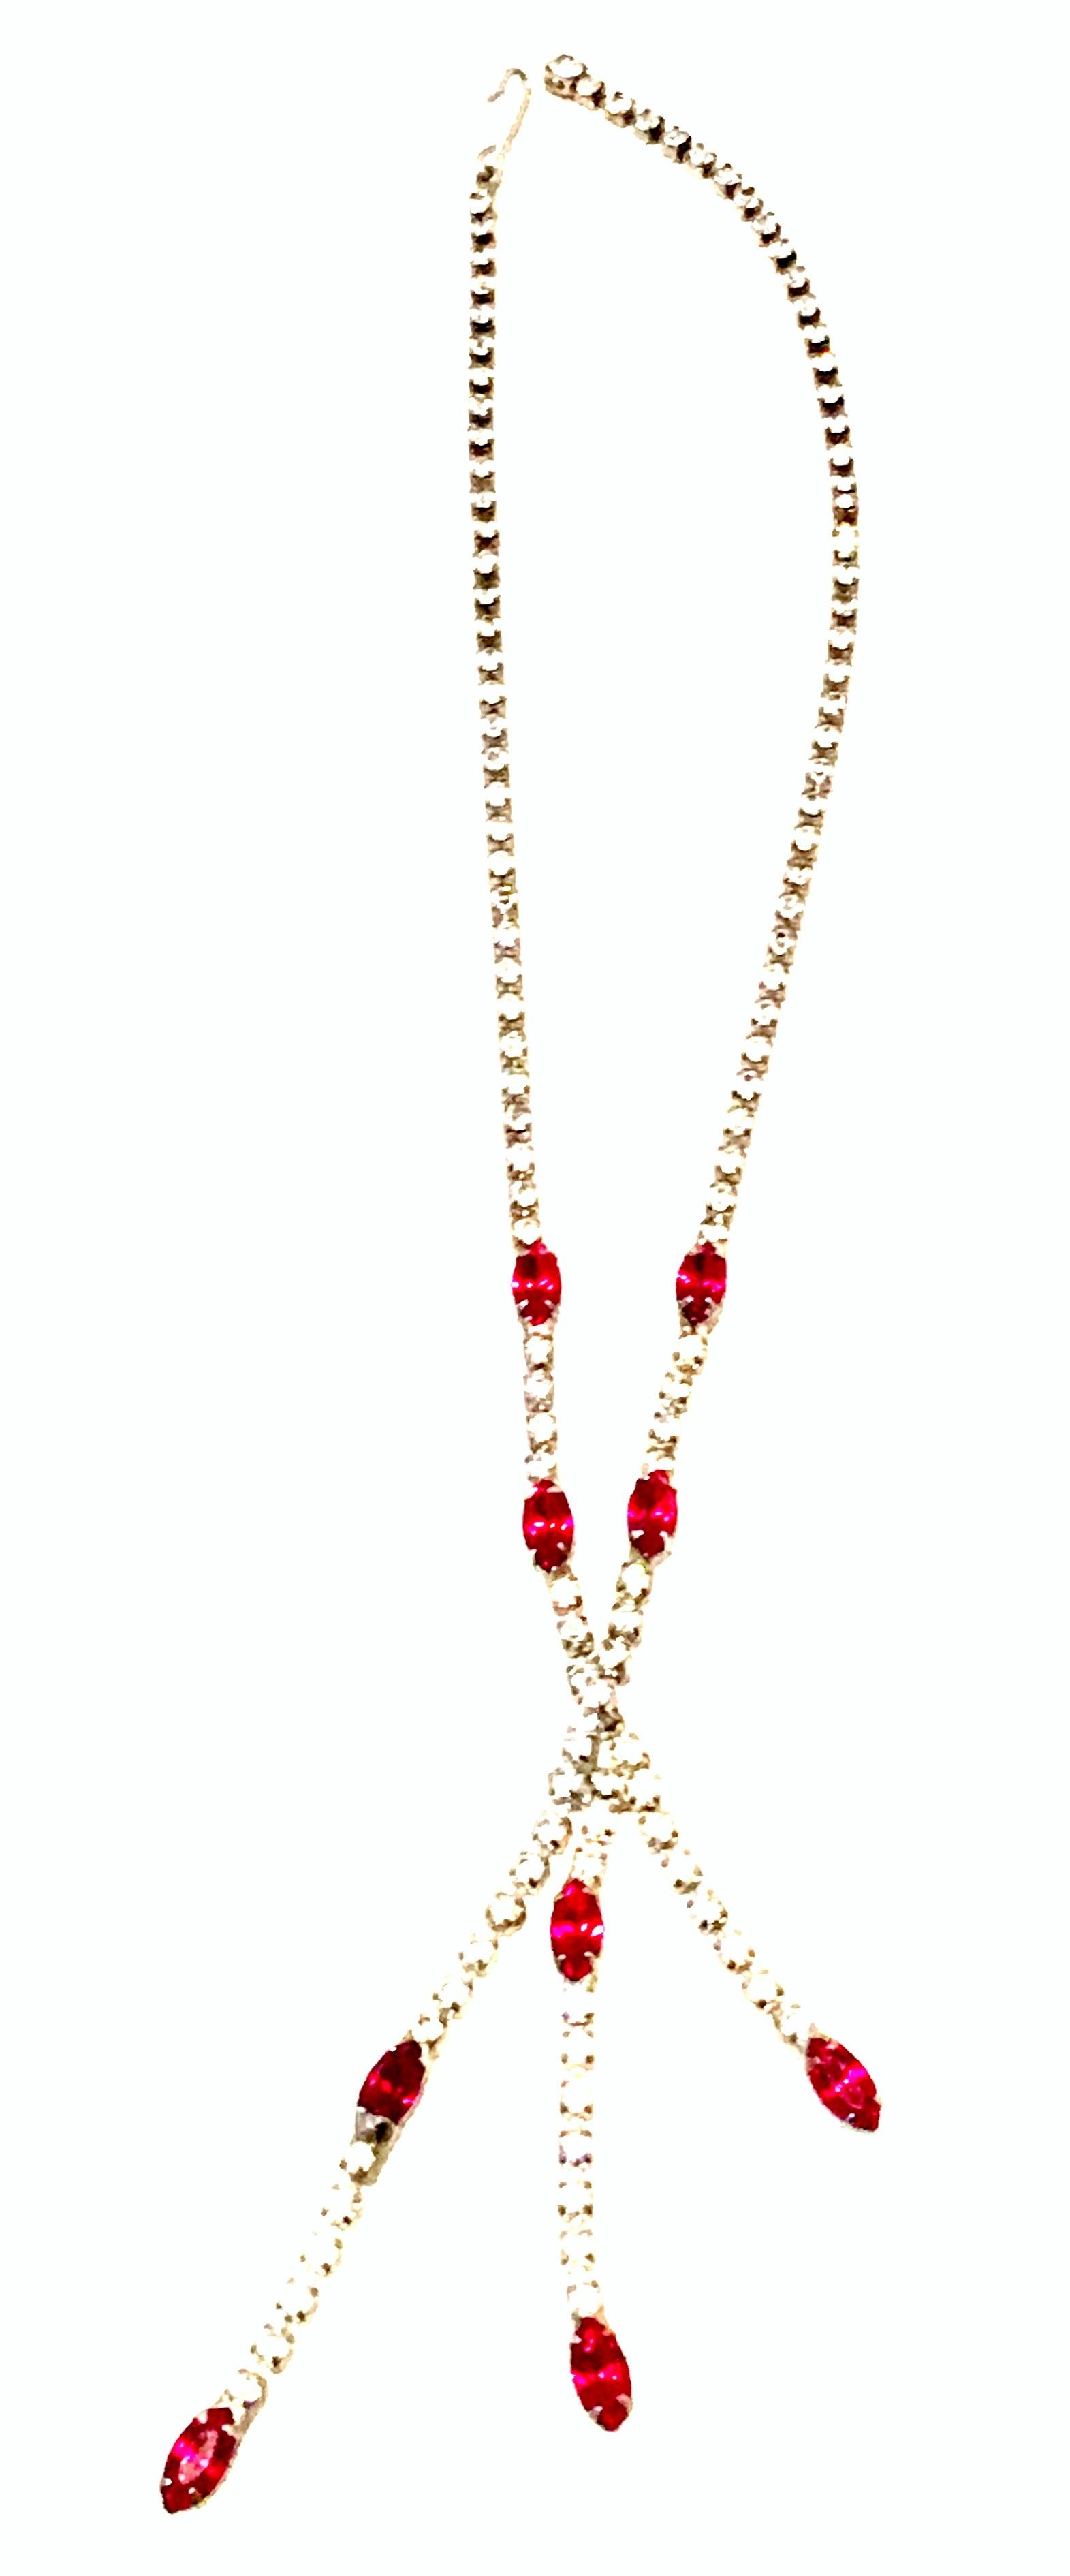 Mid-20th Century Art Deco silver Plate & Austrian Crystal Tassel Drop Necklace. This timeless, classic and sleek choker style necklace features silver plate prong set brilliant cut and faceted colorless and ruby red stones. The longest drop length